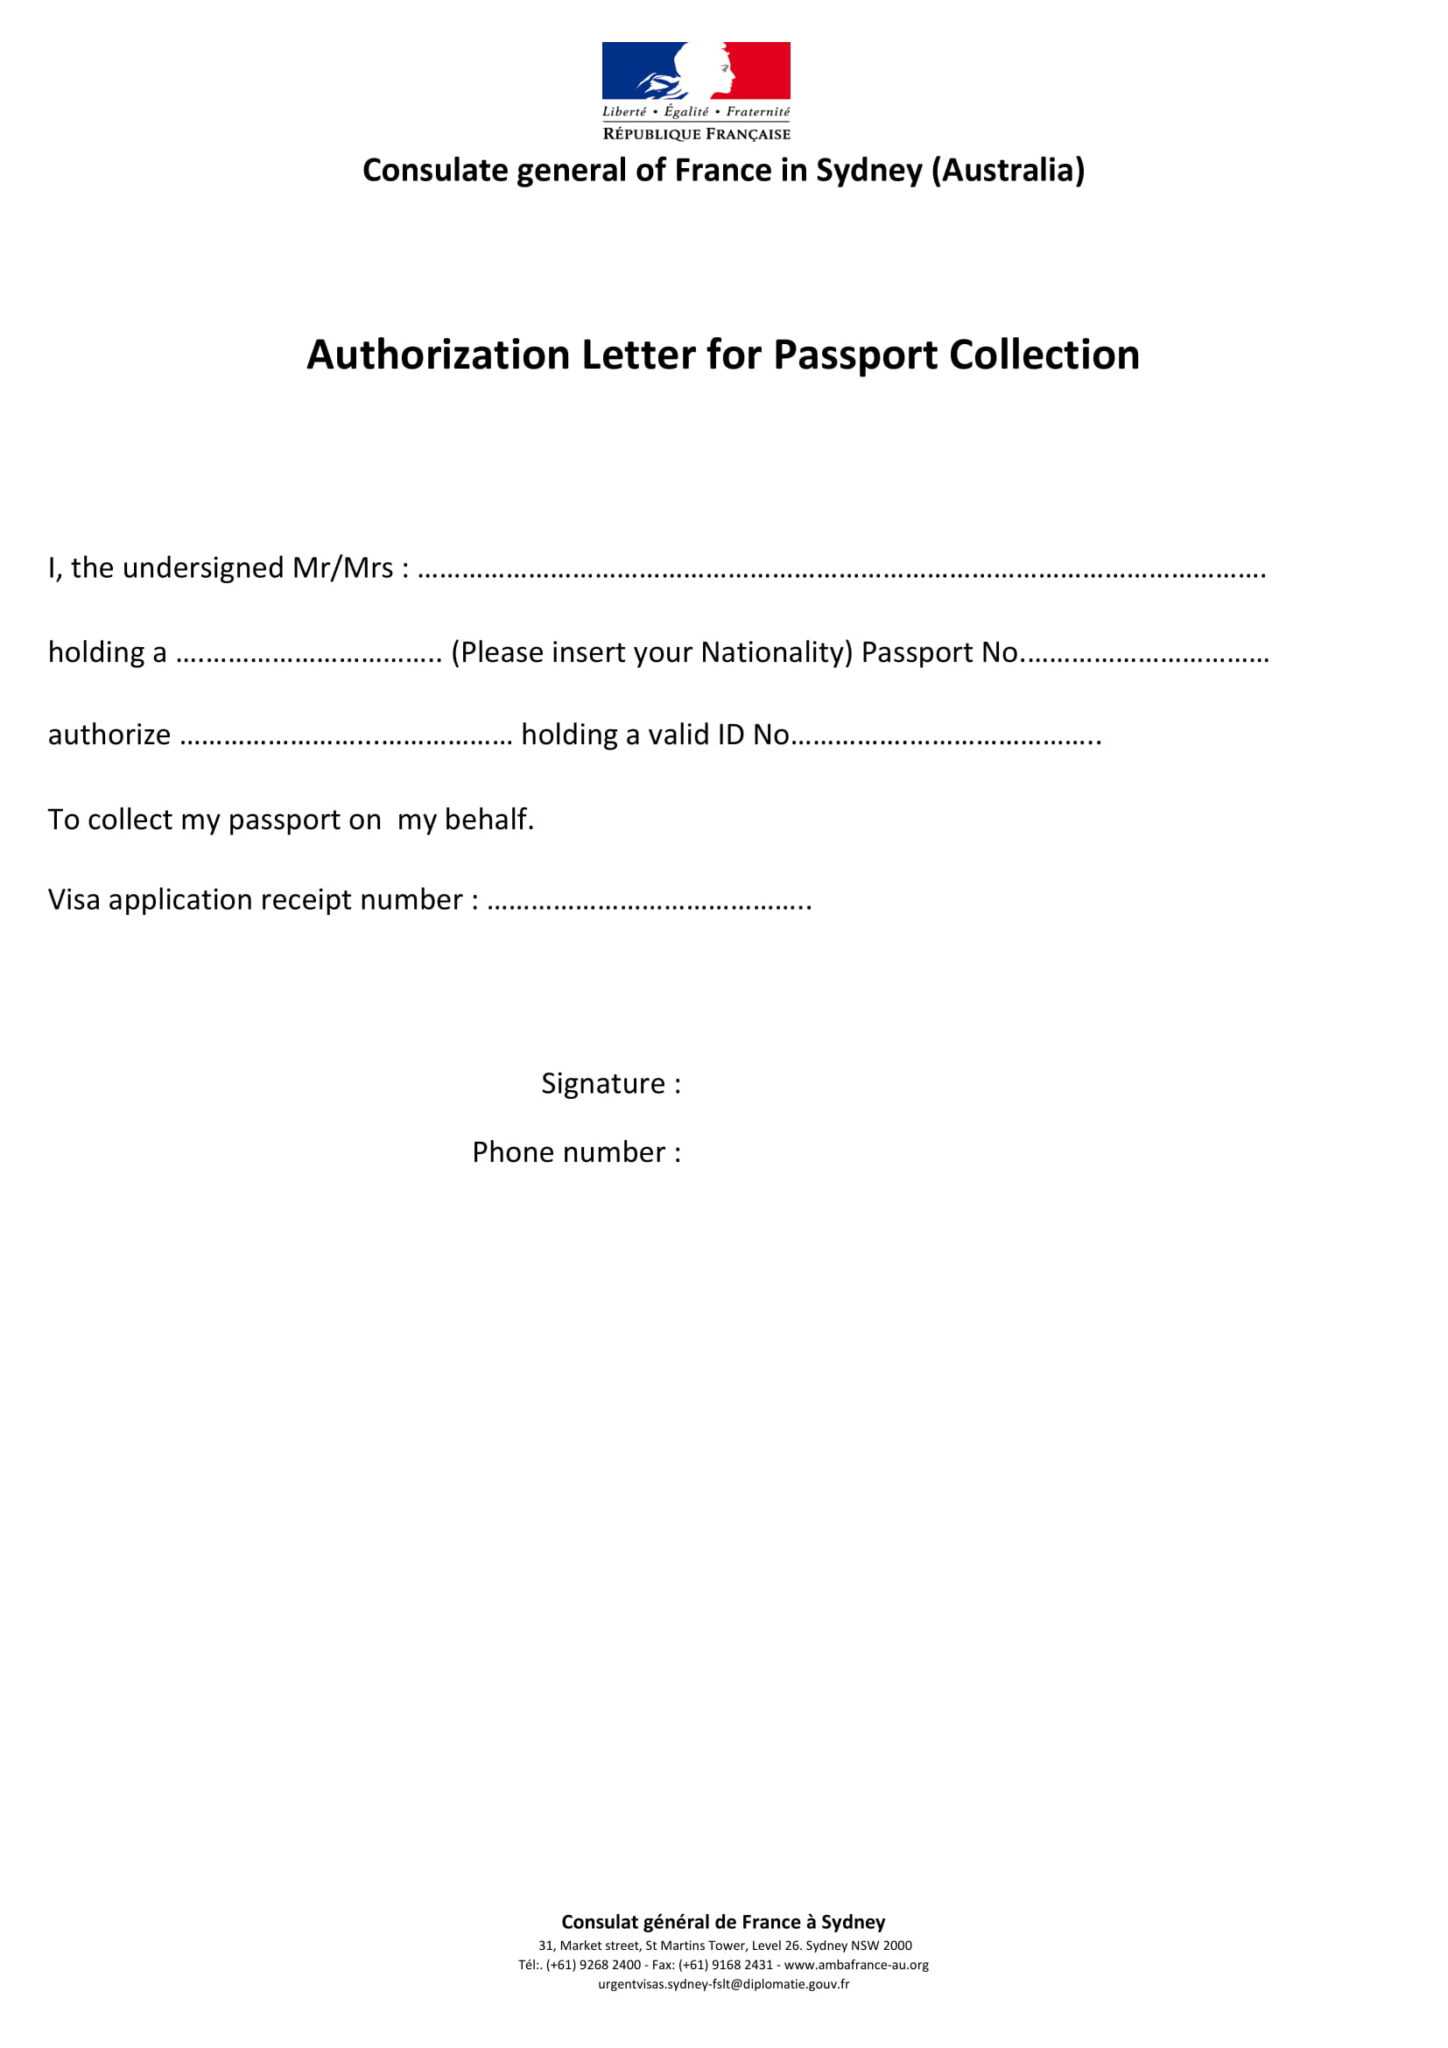 Authorization Letter To Claim Certificate